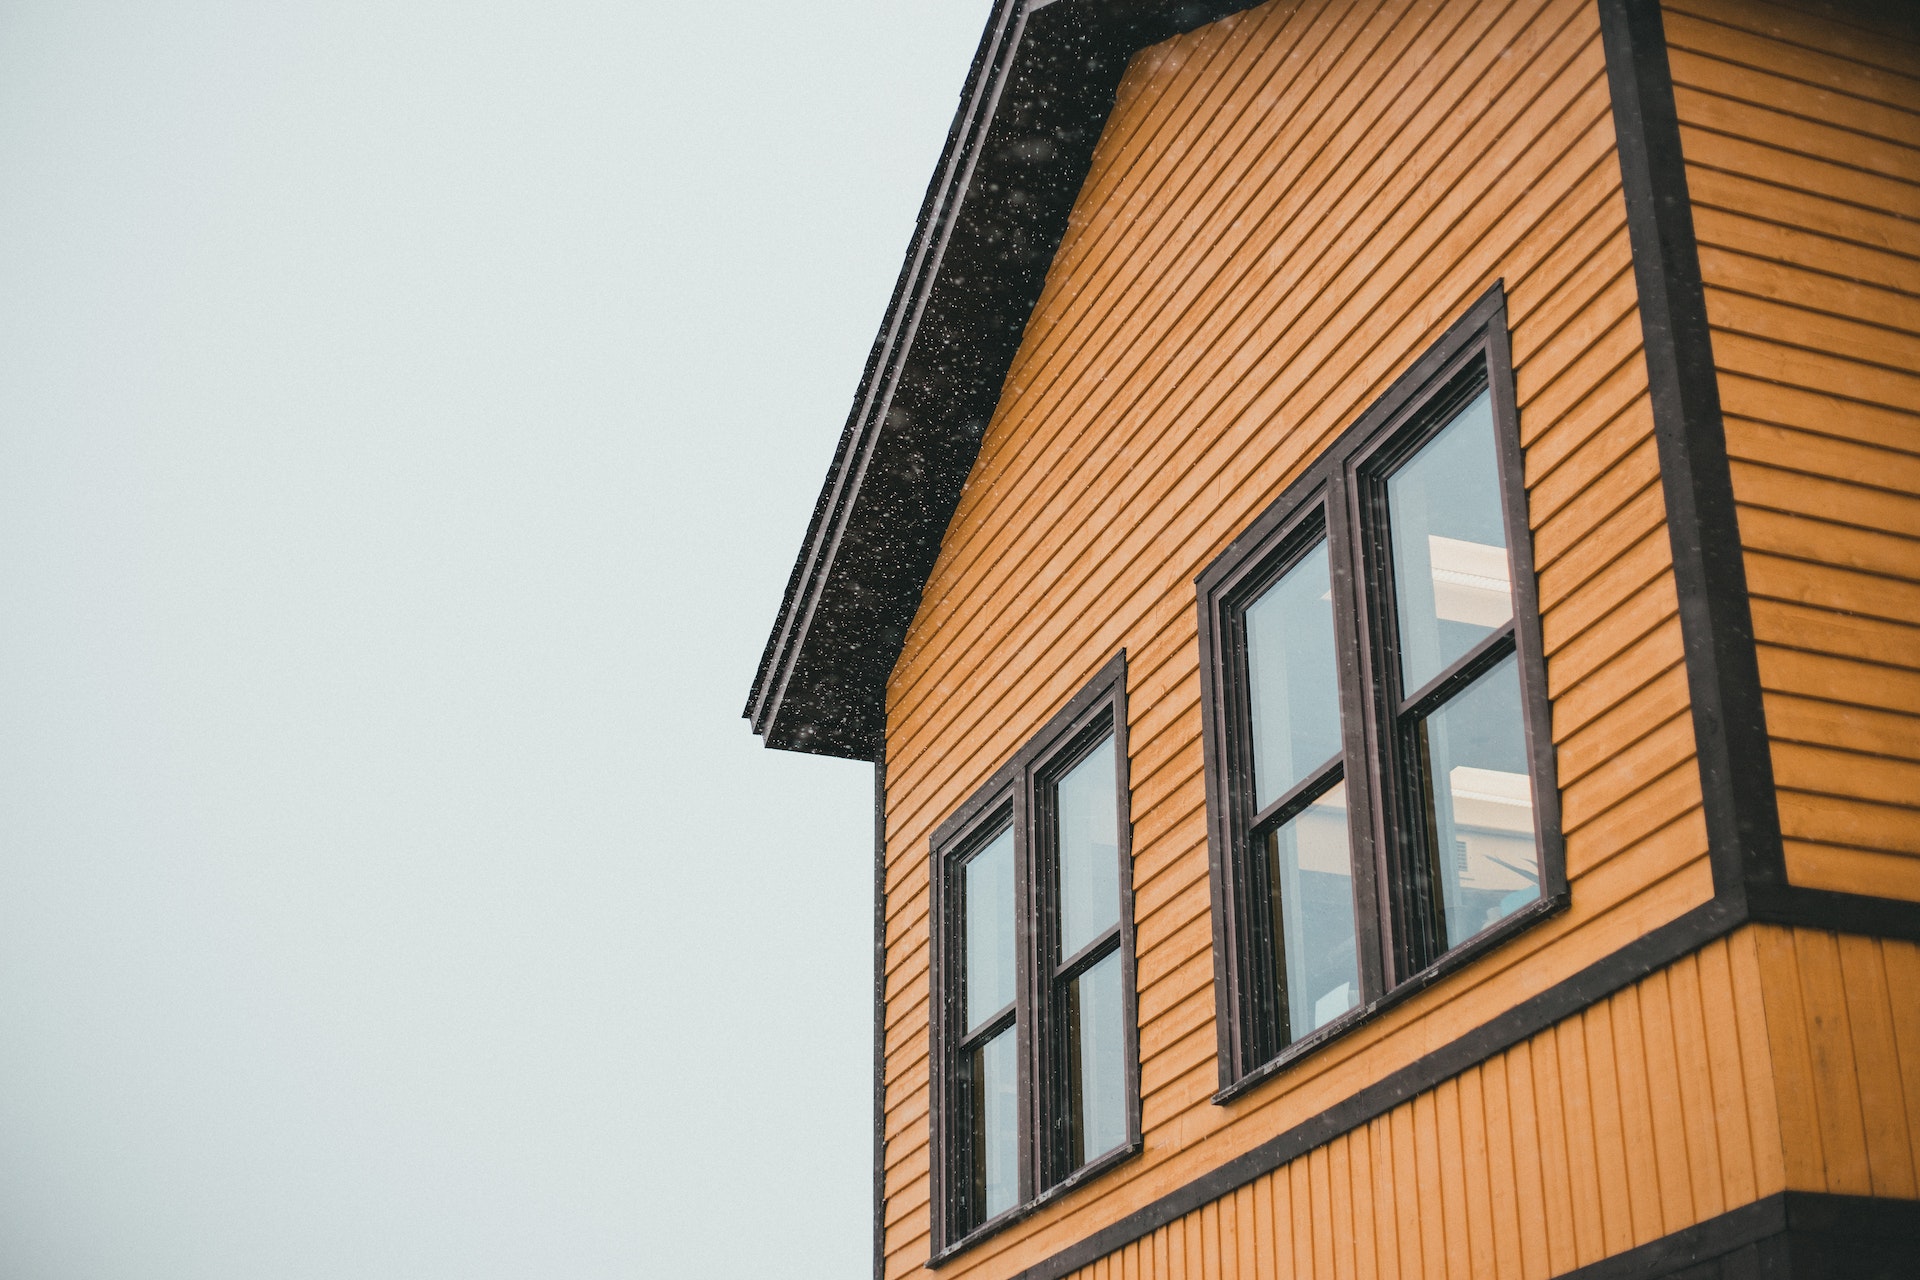 Brown Wooden Siding on a House